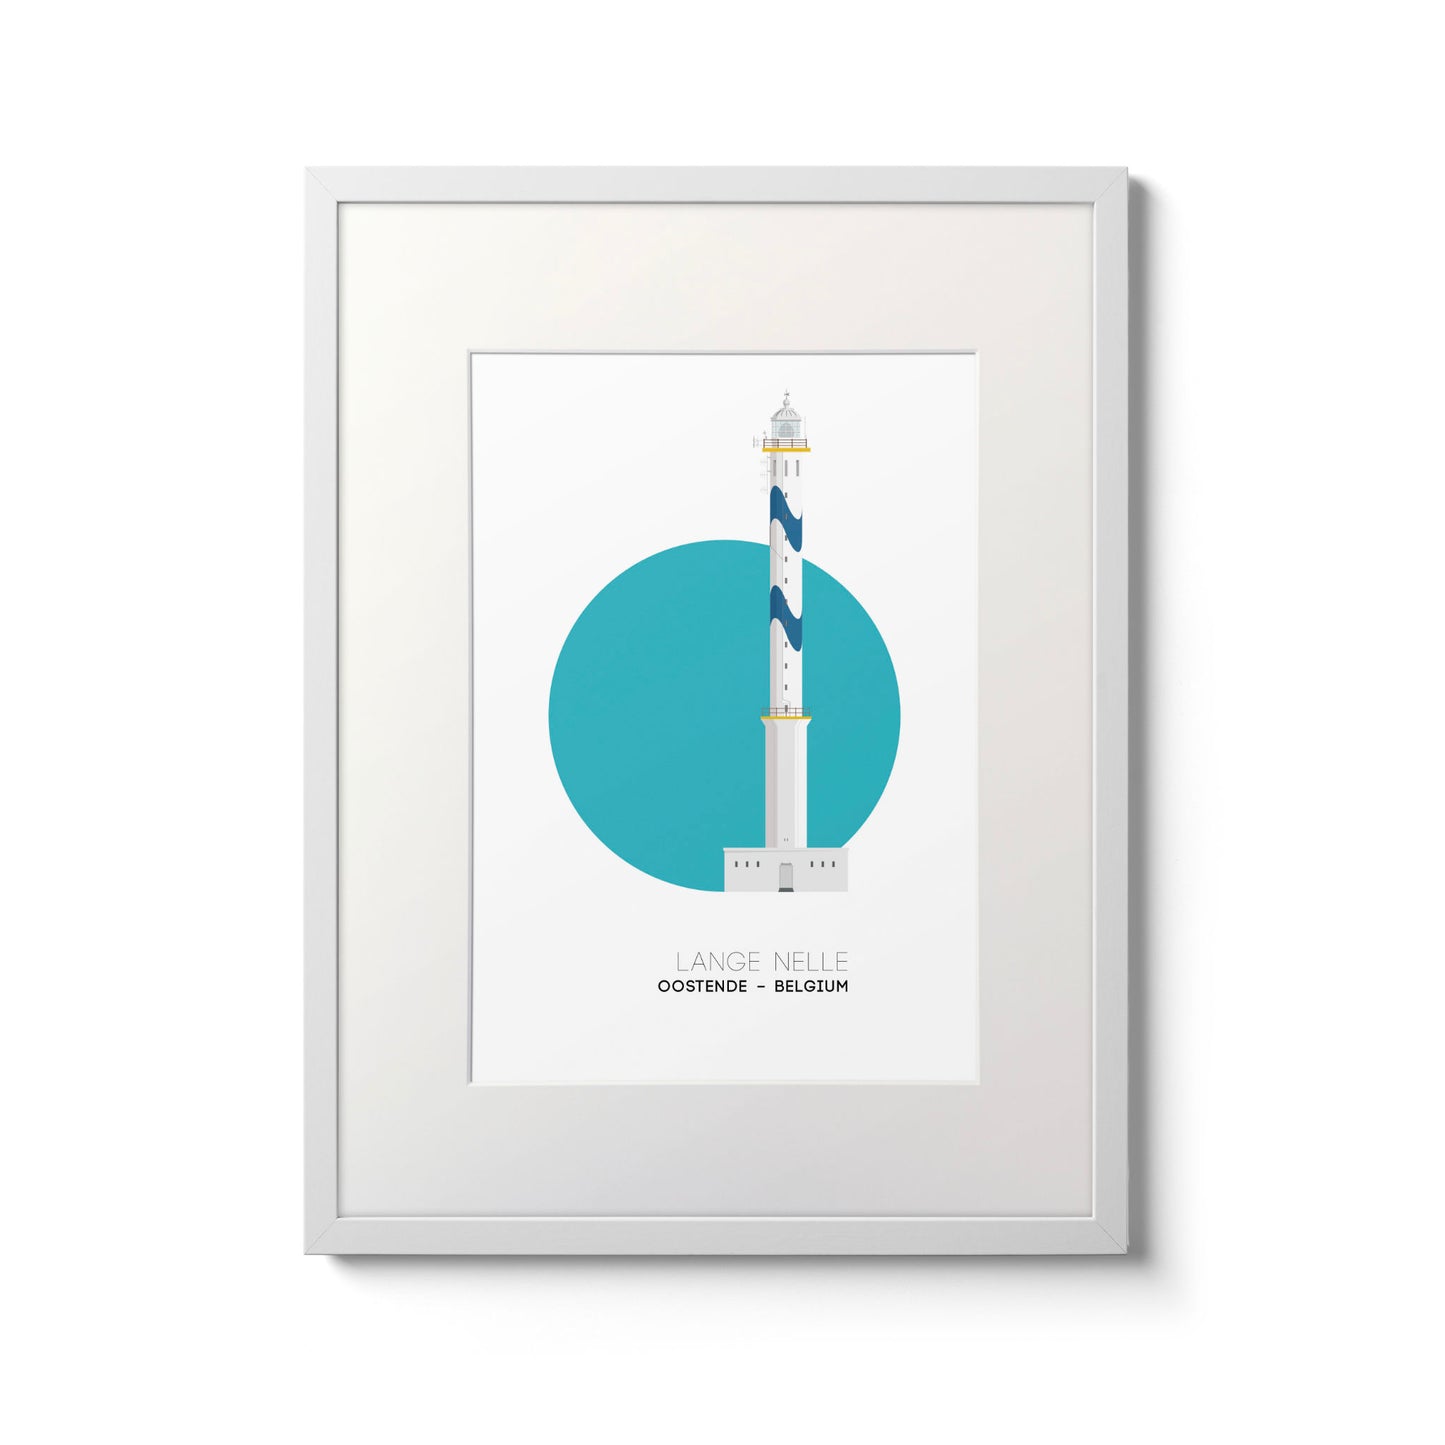 Illustration of the Lange Nelle lighthouse in Oostend, Belgium, with blue waves pattern painted onto it. On a white background with aqua blue circle as a backdrop, framed and measuring 30x40cm.